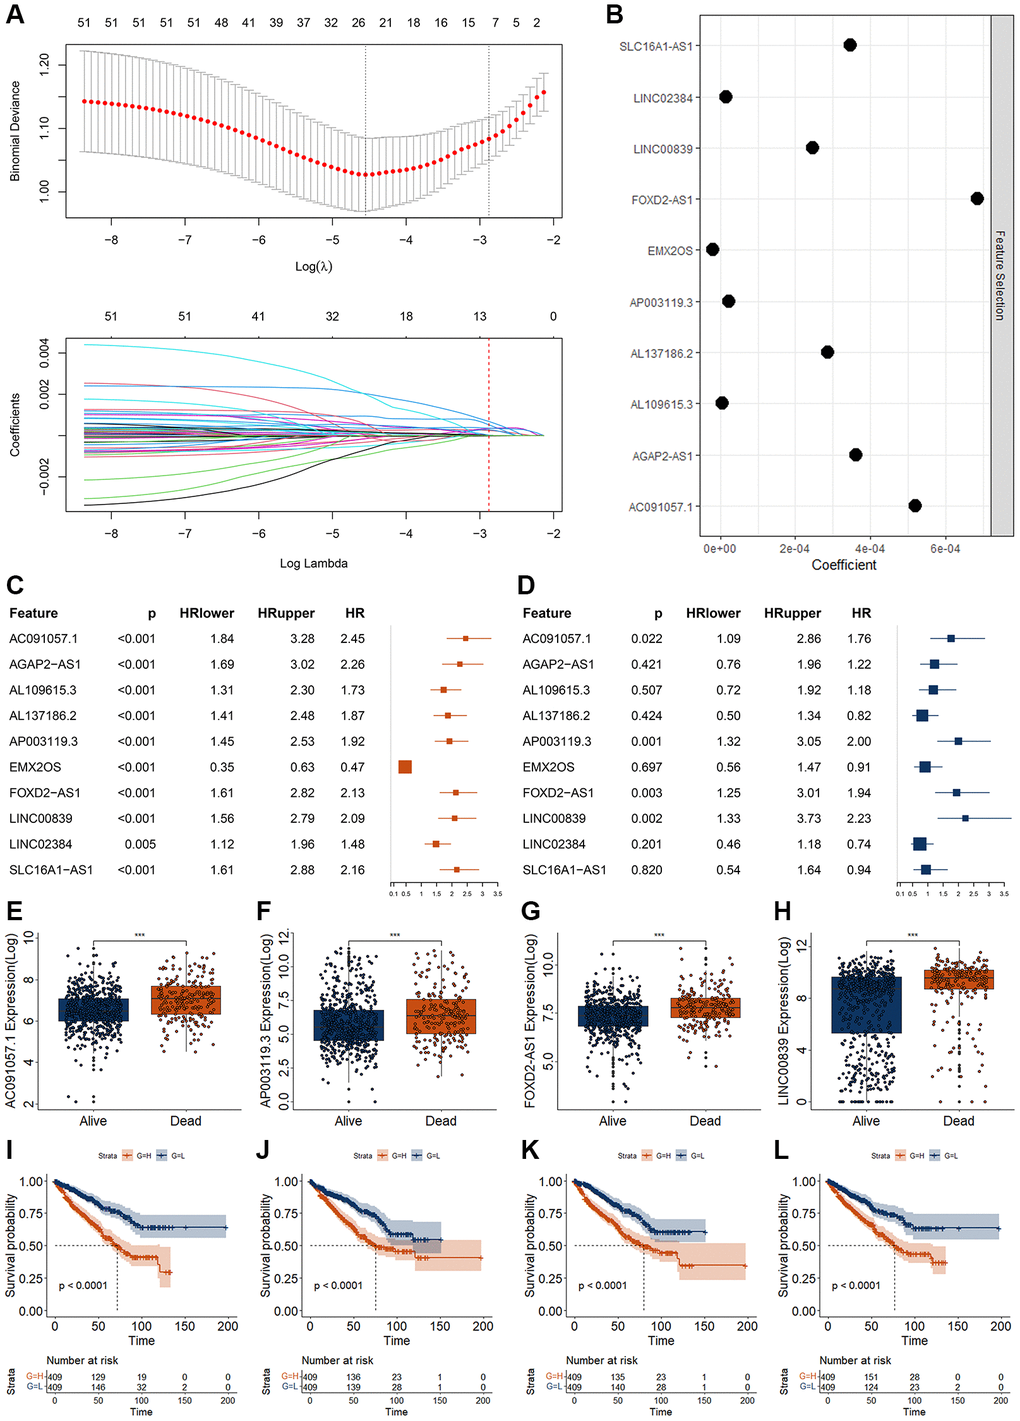 Screening of RCC biomarkers based on DECRLs. (A, B) Feature selection for 53 DECRLs using lasso algorithm. (C, D) Results of univariate (C) and multivariate (D) Cox regression for 10 DECRLs. (E–H) Expression of AC091057.1 (E), AP003119.3 (F), FOXD2-AS1 (G), LINC00839 (H) between alive and dead RCC patients. (I–L) K-M curve of AC091057.1 (I), AP003119.3 (J), FOXD2-AS1 (K), LINC00839 (L) in RCC patients. *p **p ***p 